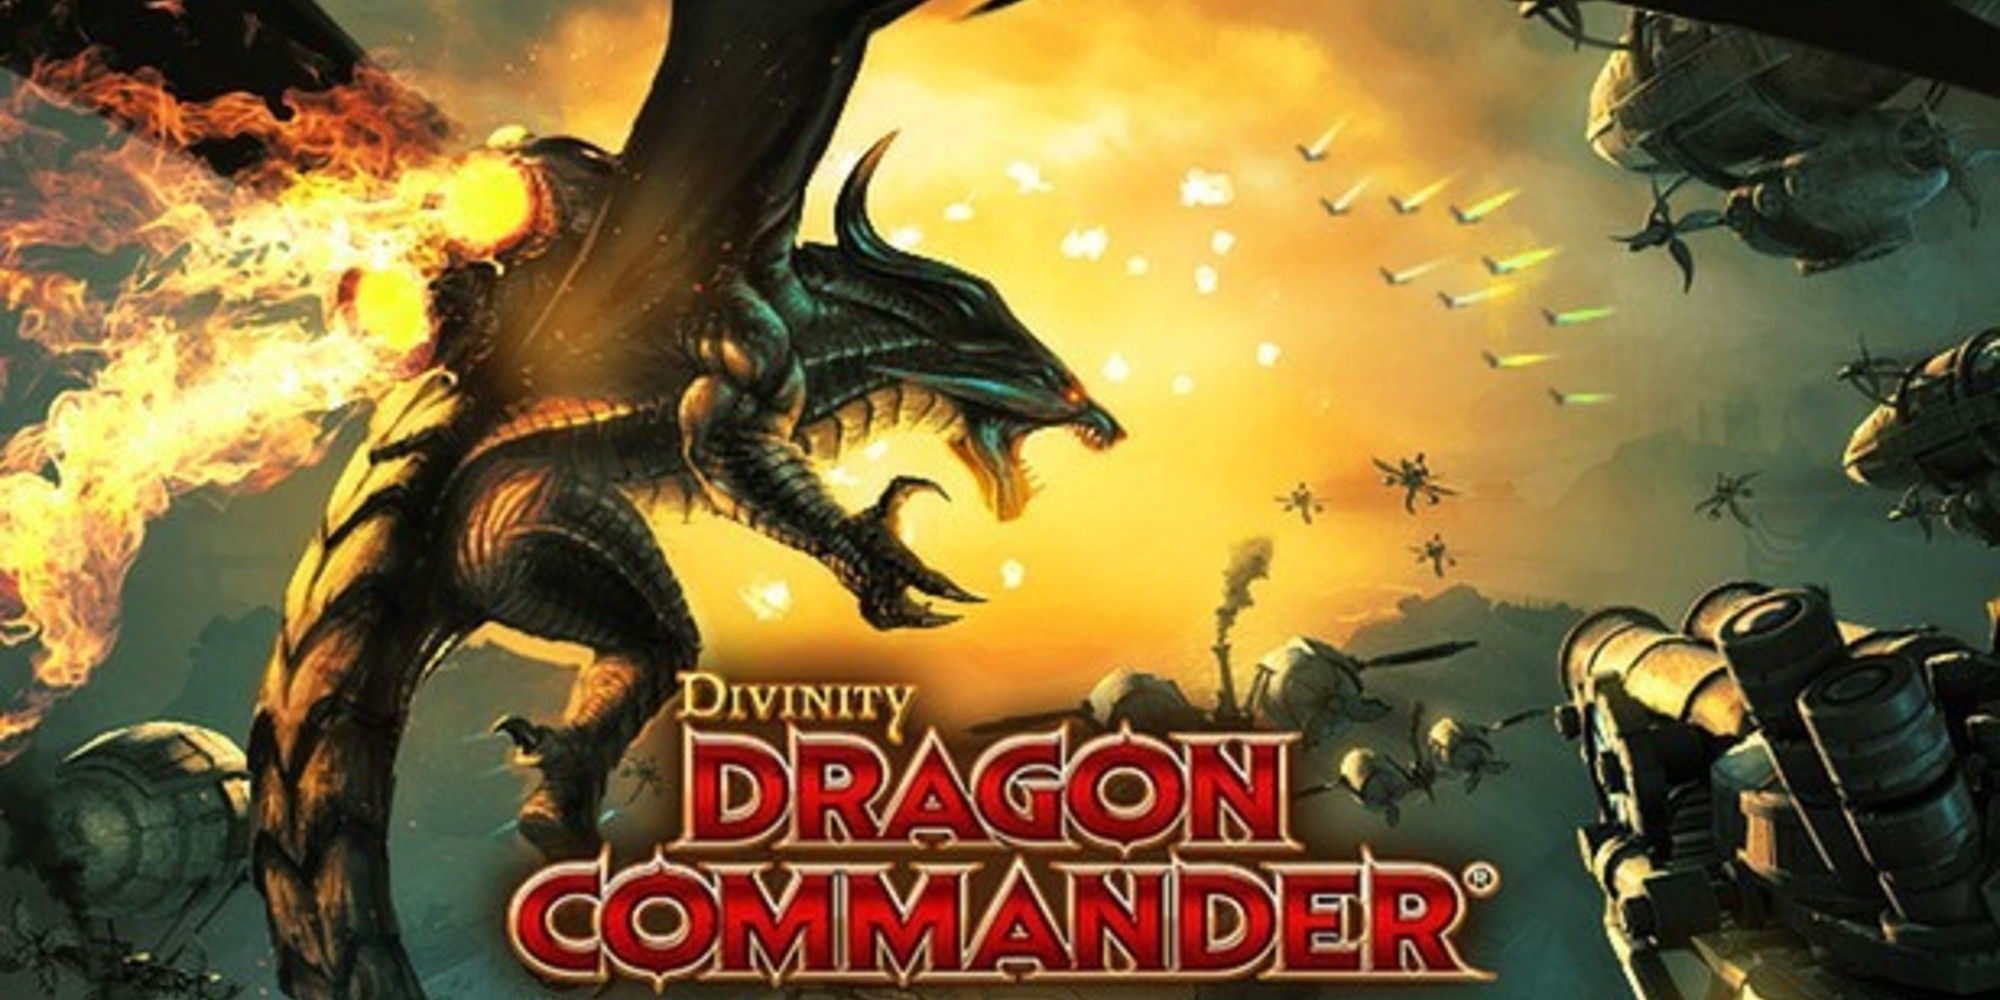 Divinity Dragon Commander Cover Art, a dragon ready to attack as a war is breaking out